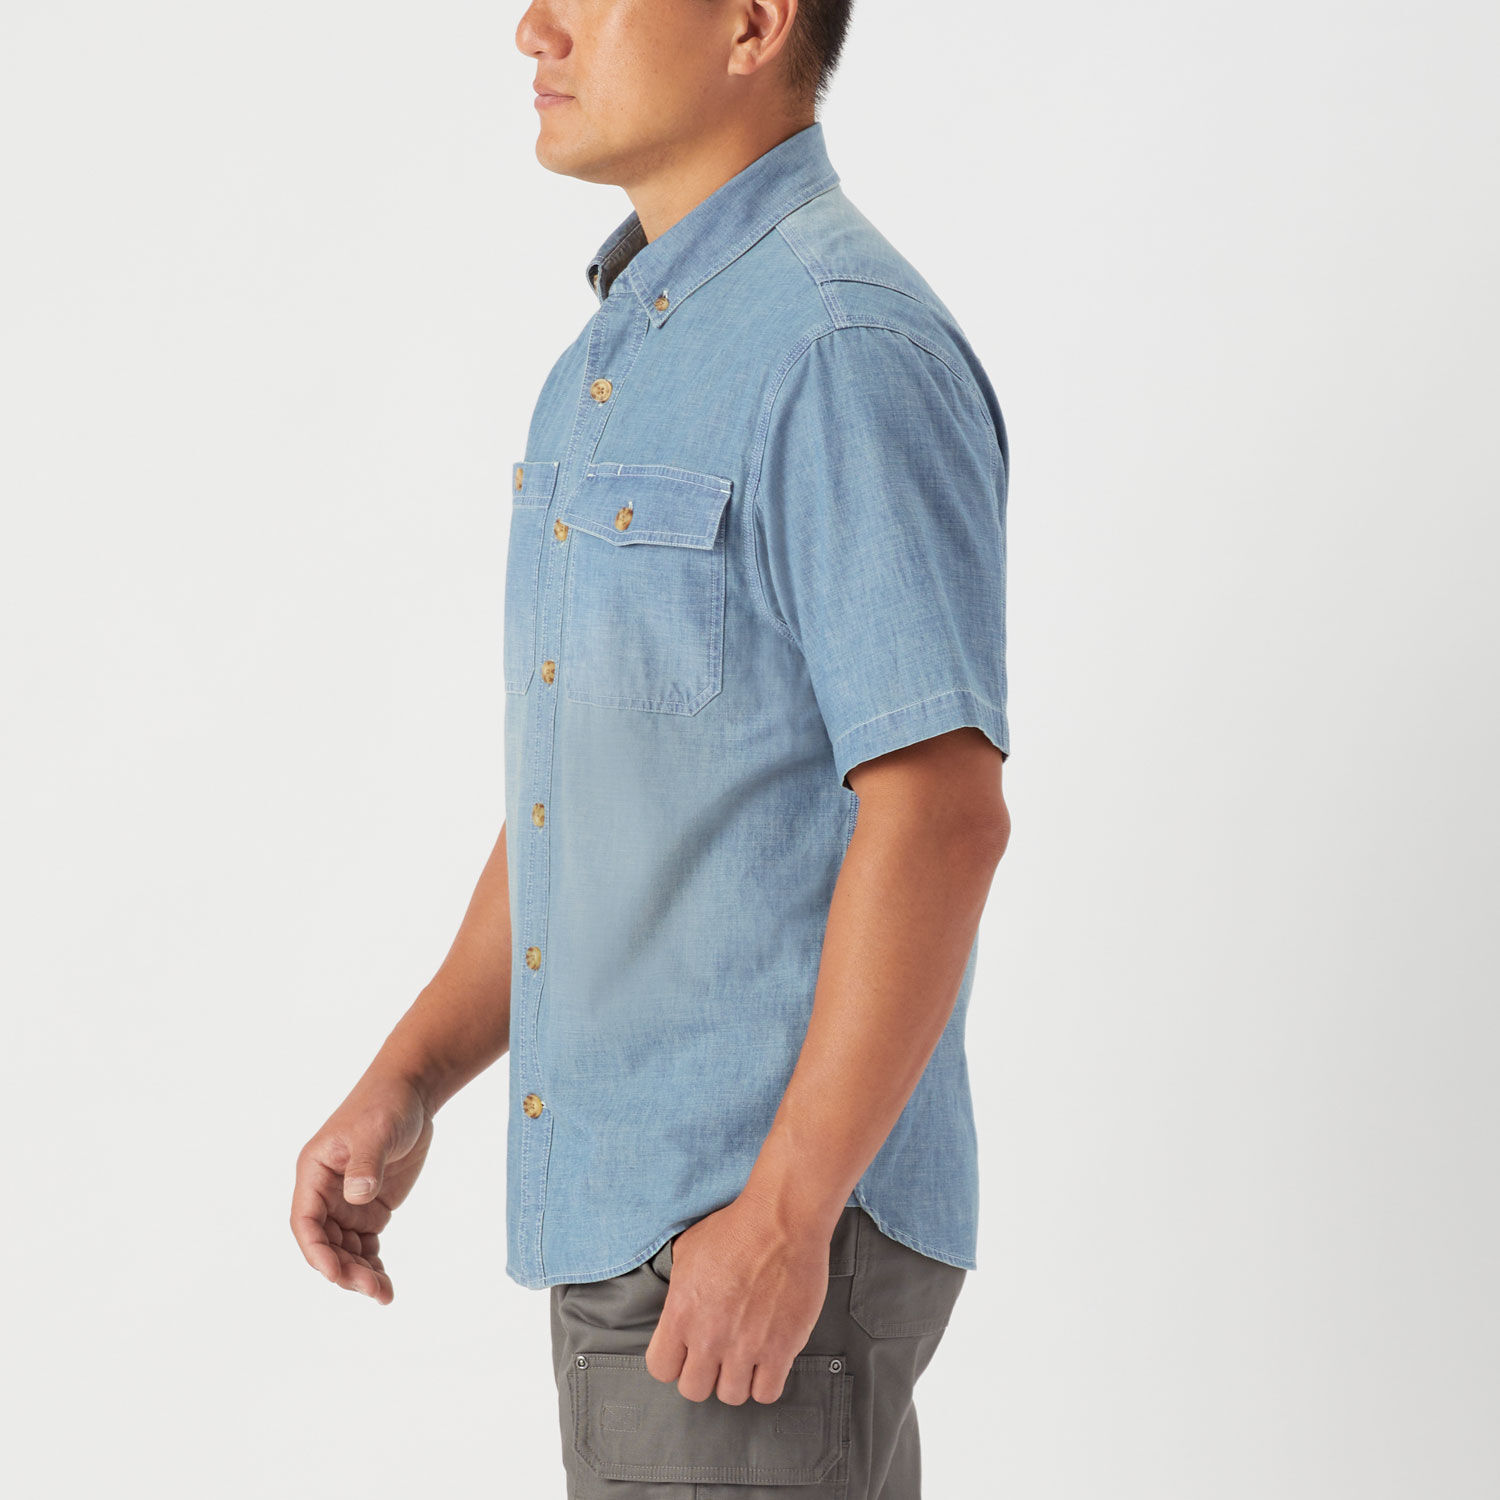 COOLMAX Chambray Standard Fit Short Sleeve Shirt | Duluth Trading